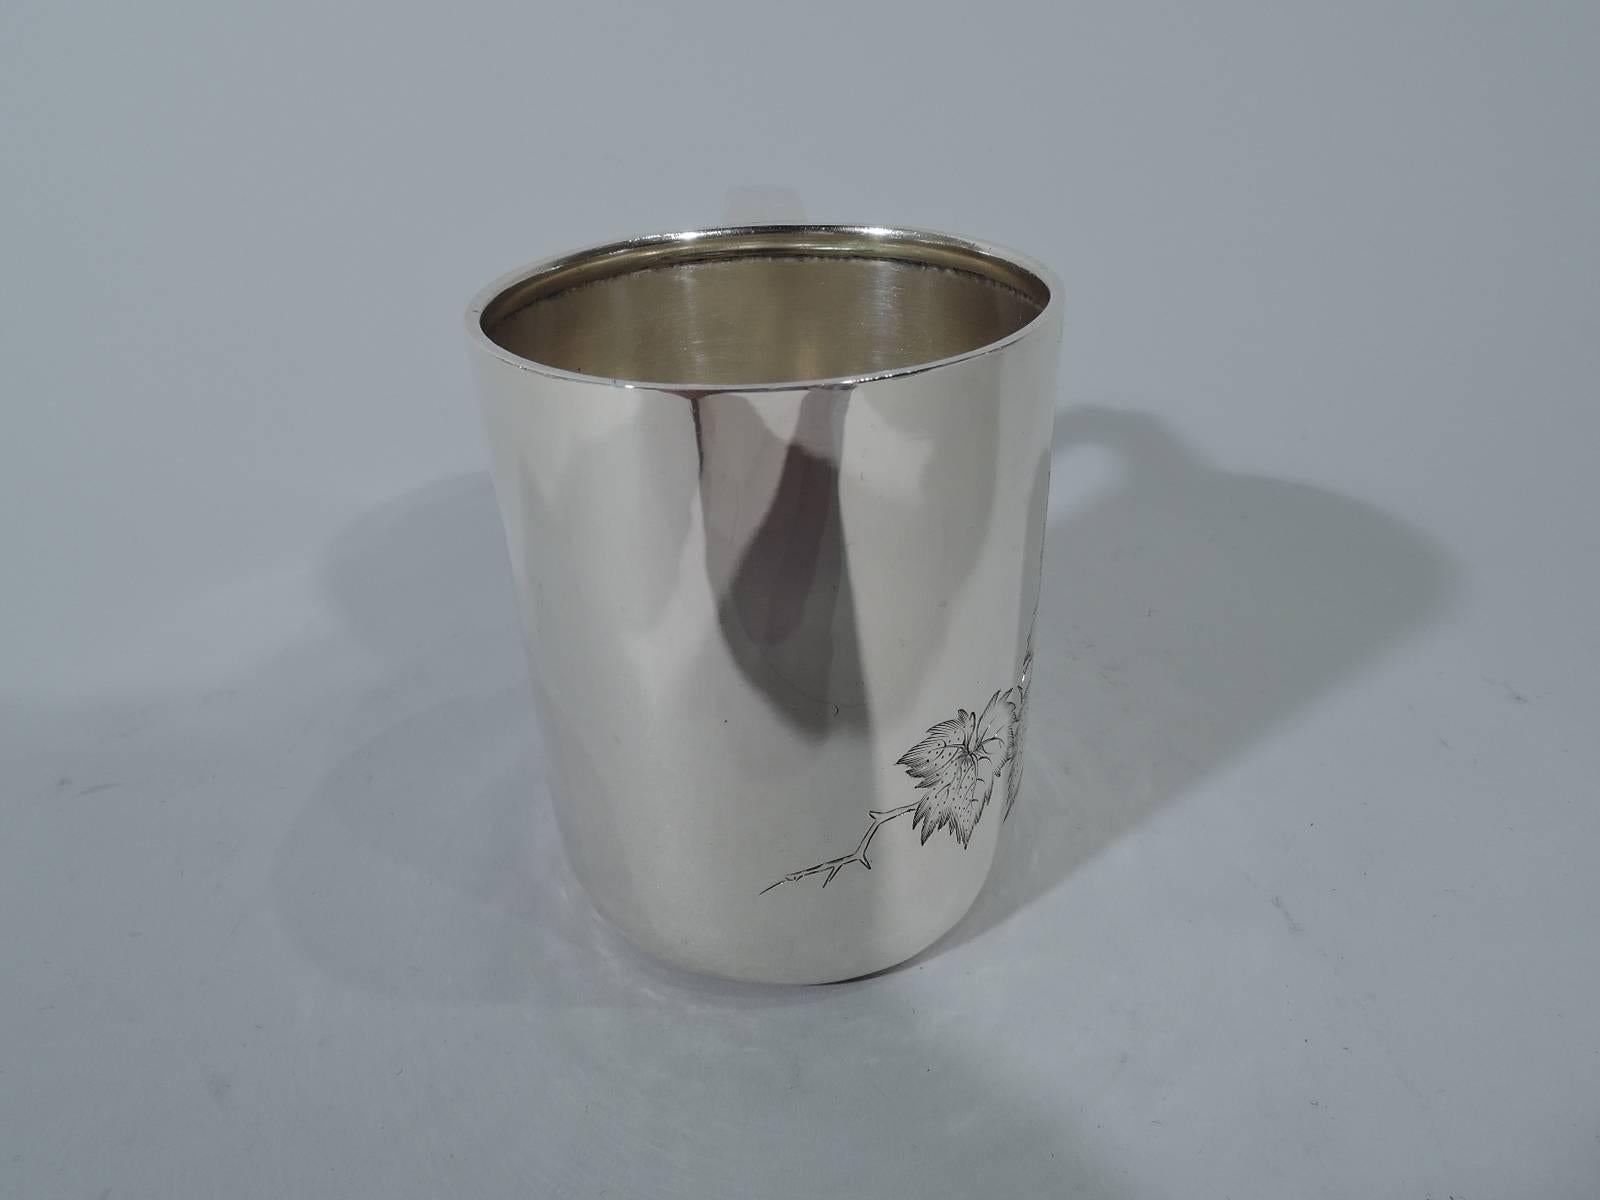 Sterling silver baby cup. Made by Tiffany & Co. in New York, circa 1875. Straight sides and scrolled bracket handle. On front is engraved fruiting berry branch with lush bunches. Back vacant. Hallmark includes pattern no. 4104 (first produced in